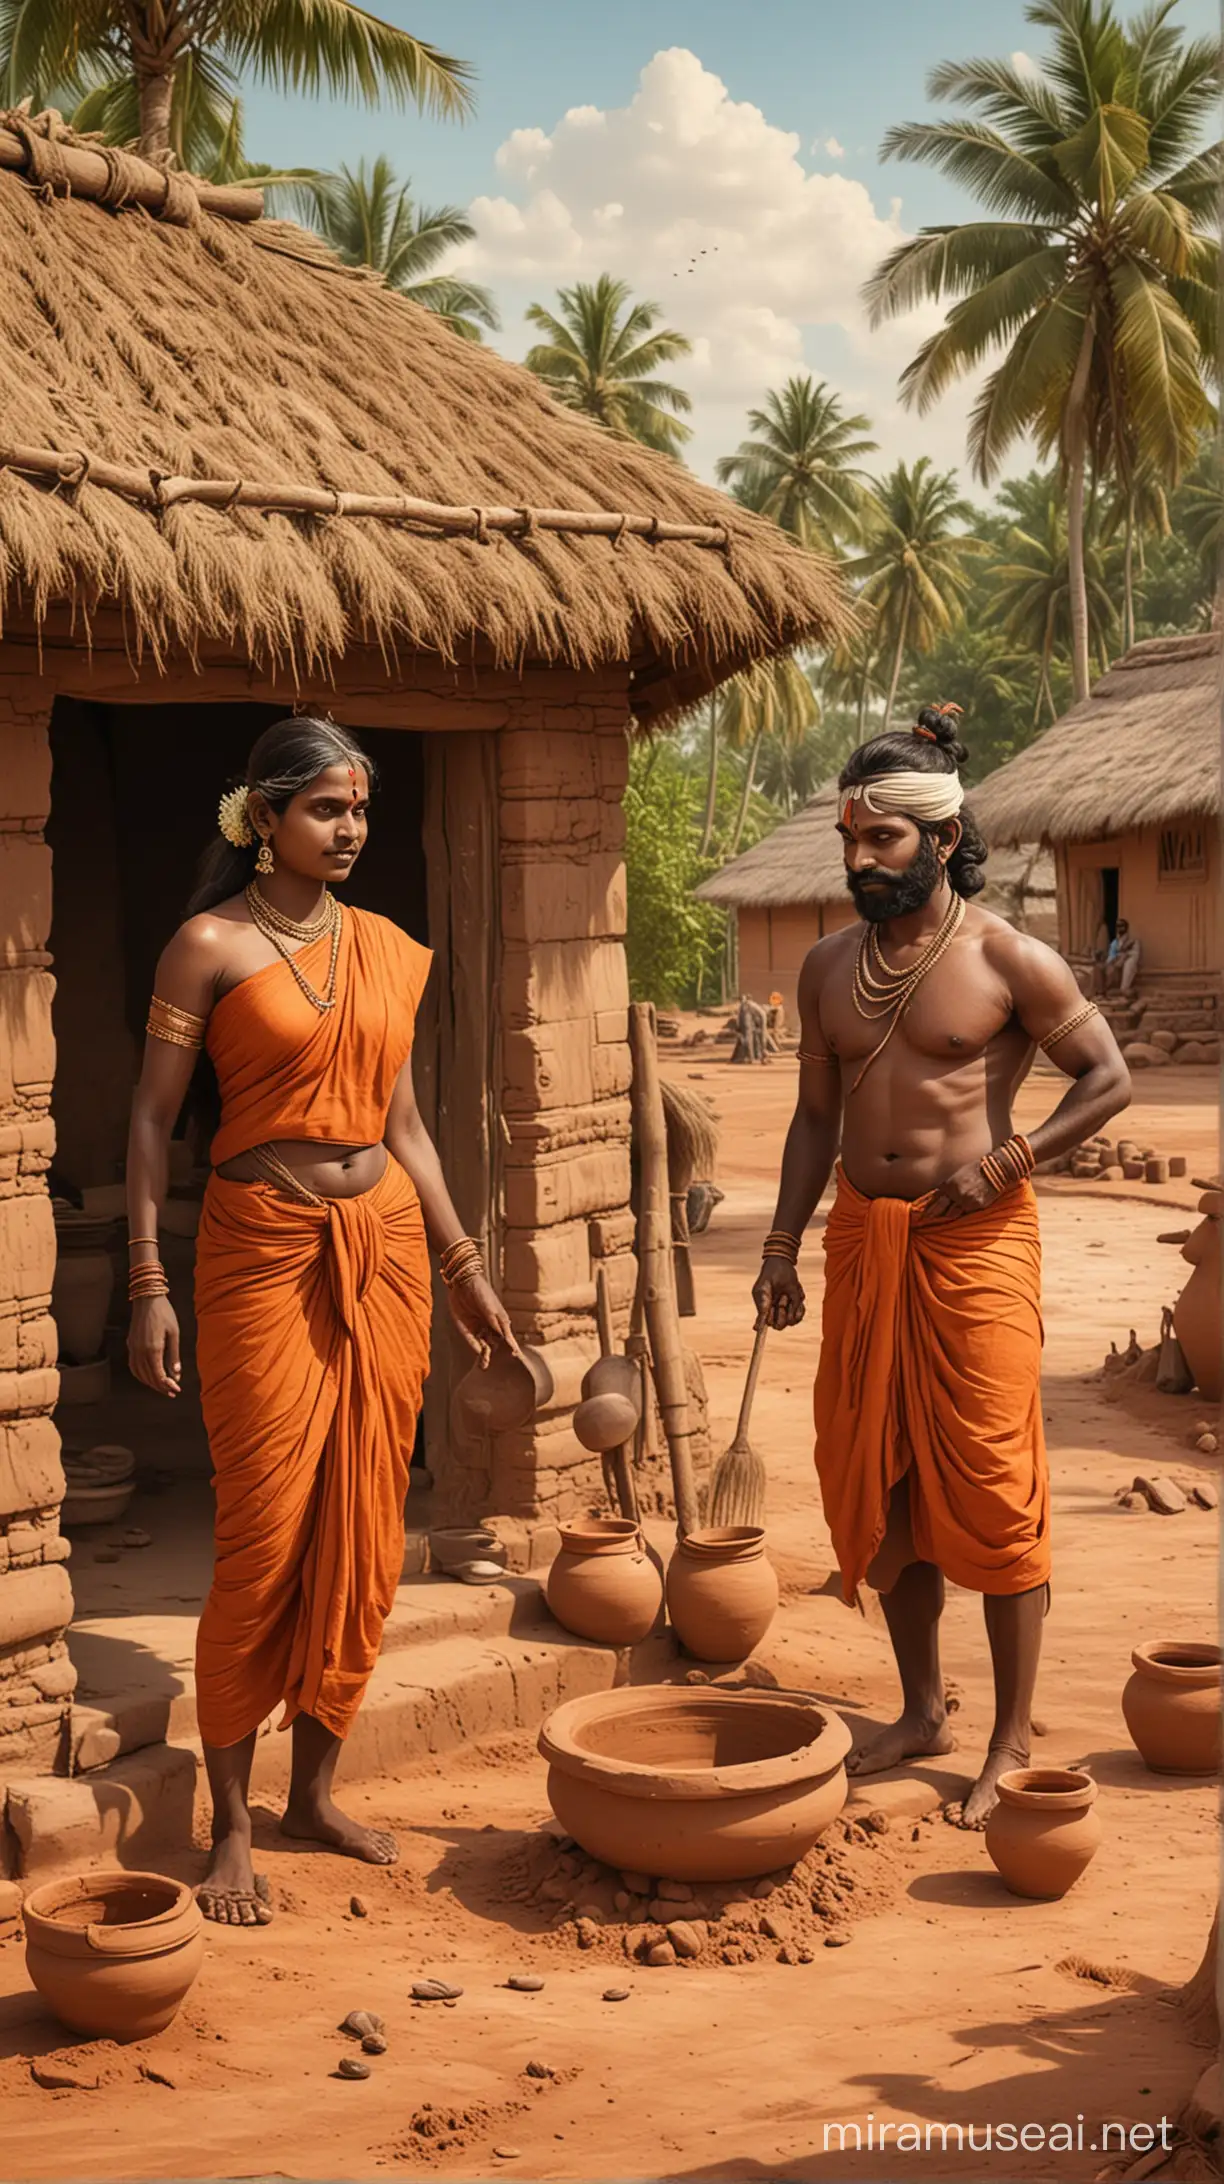 Ancient Tamil Couple Devotees Making Clay Pots in Village Hut